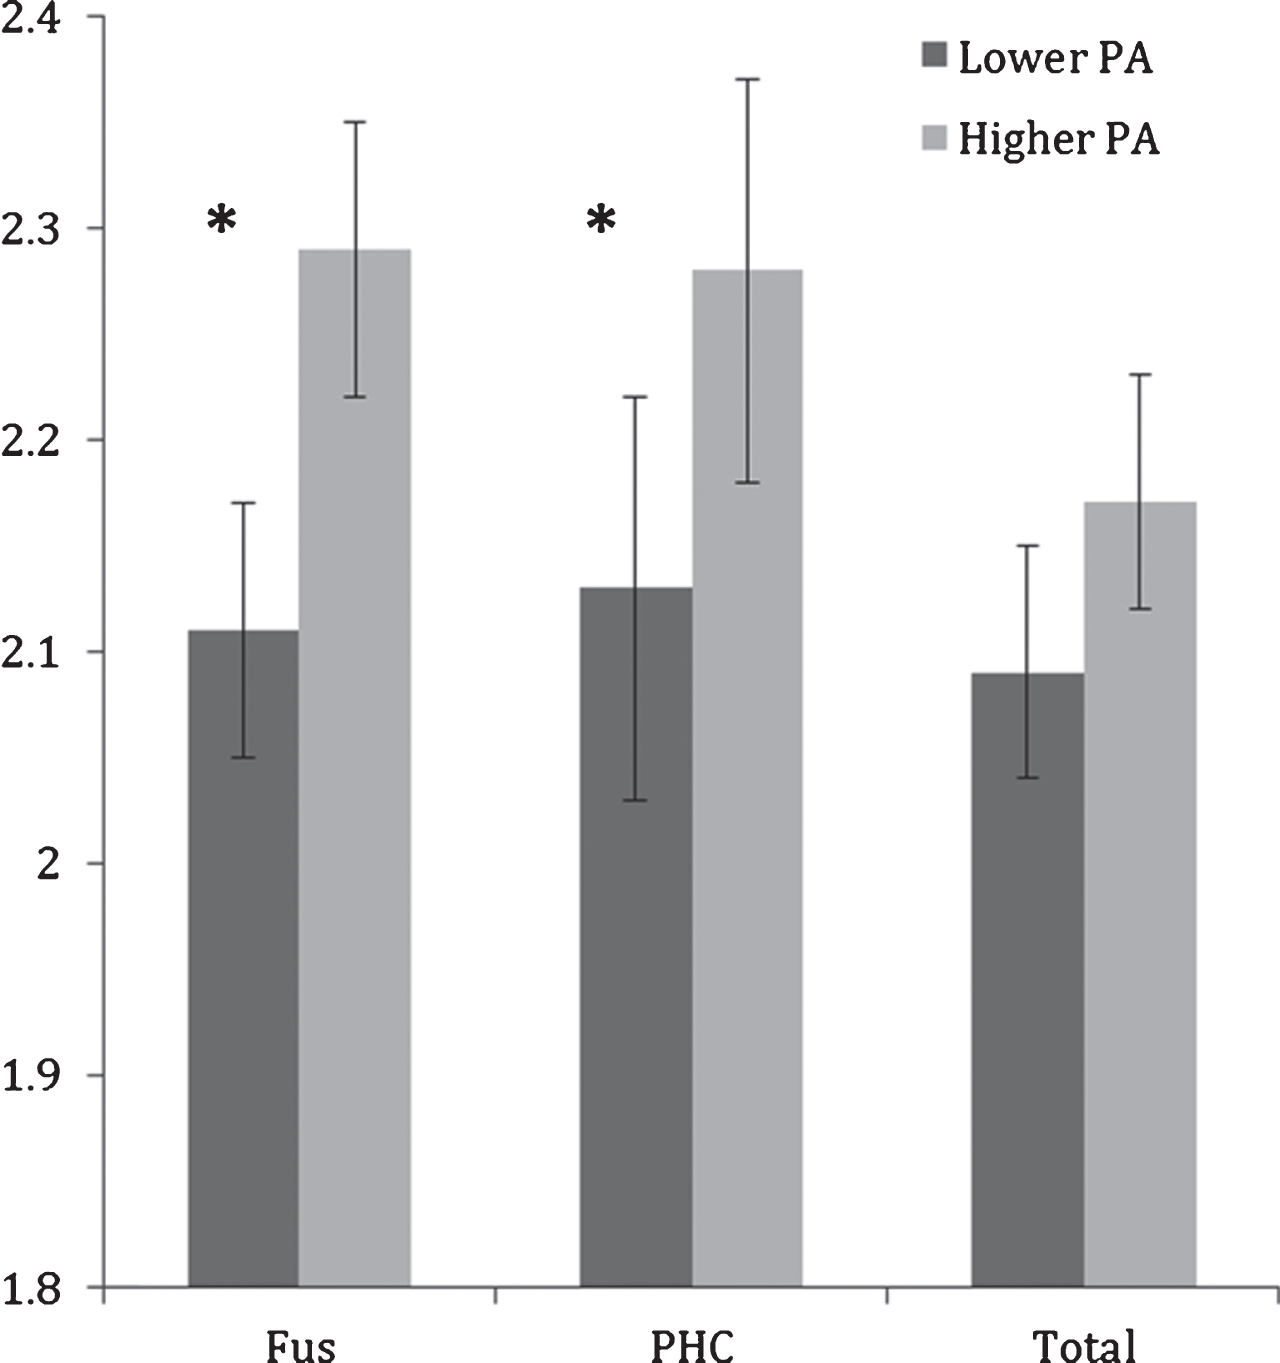 Mean fusiform (FUS) and parahippocampal cortex (PHC) and total MTL thicknesses (in mm) in lower and higher physical activity (PA) groups. Error bars represent 95% confidence limits; *p < 0.05